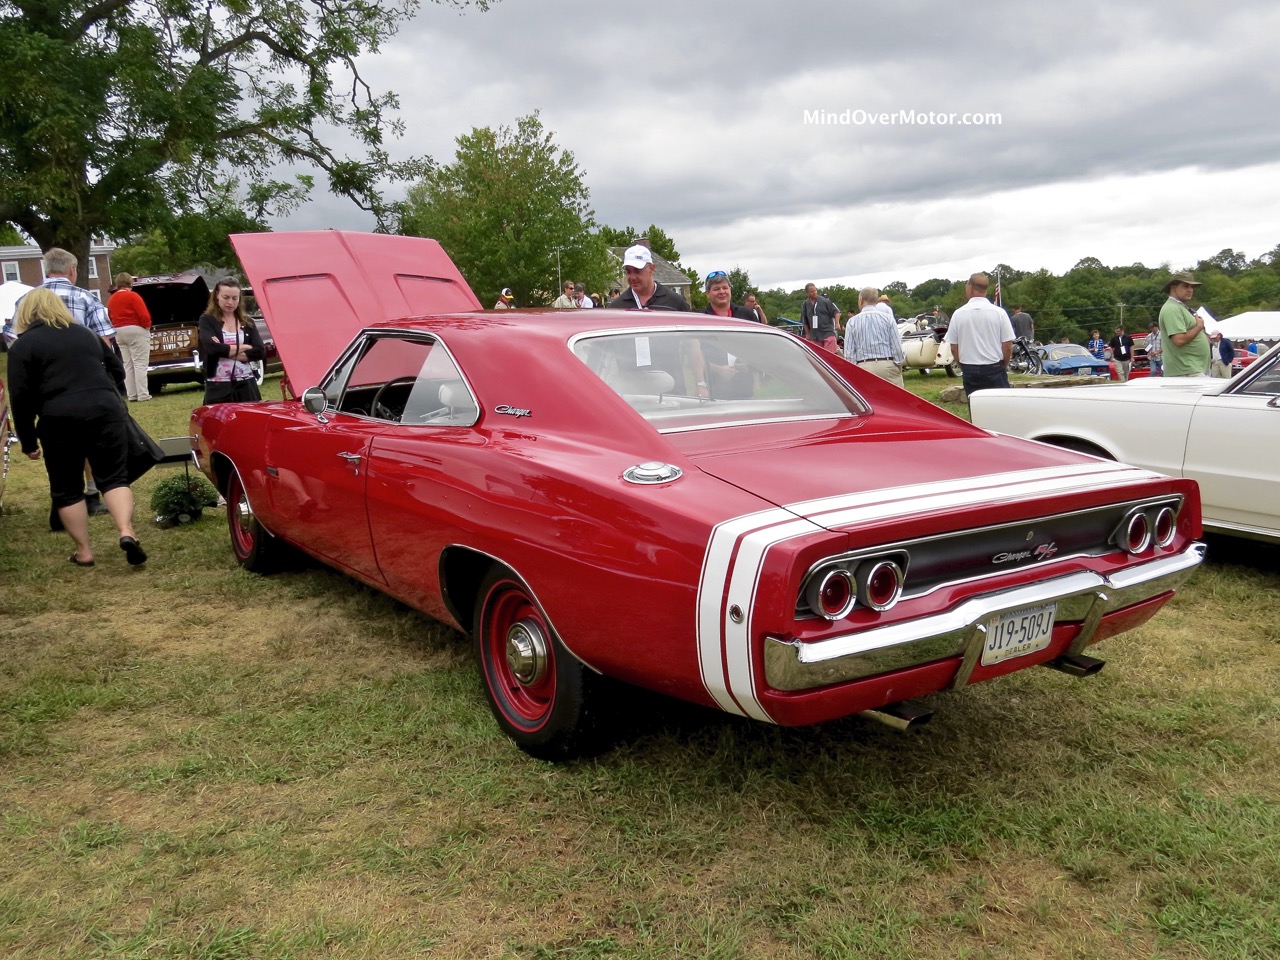 1968 Dodge Charger R:T Rear